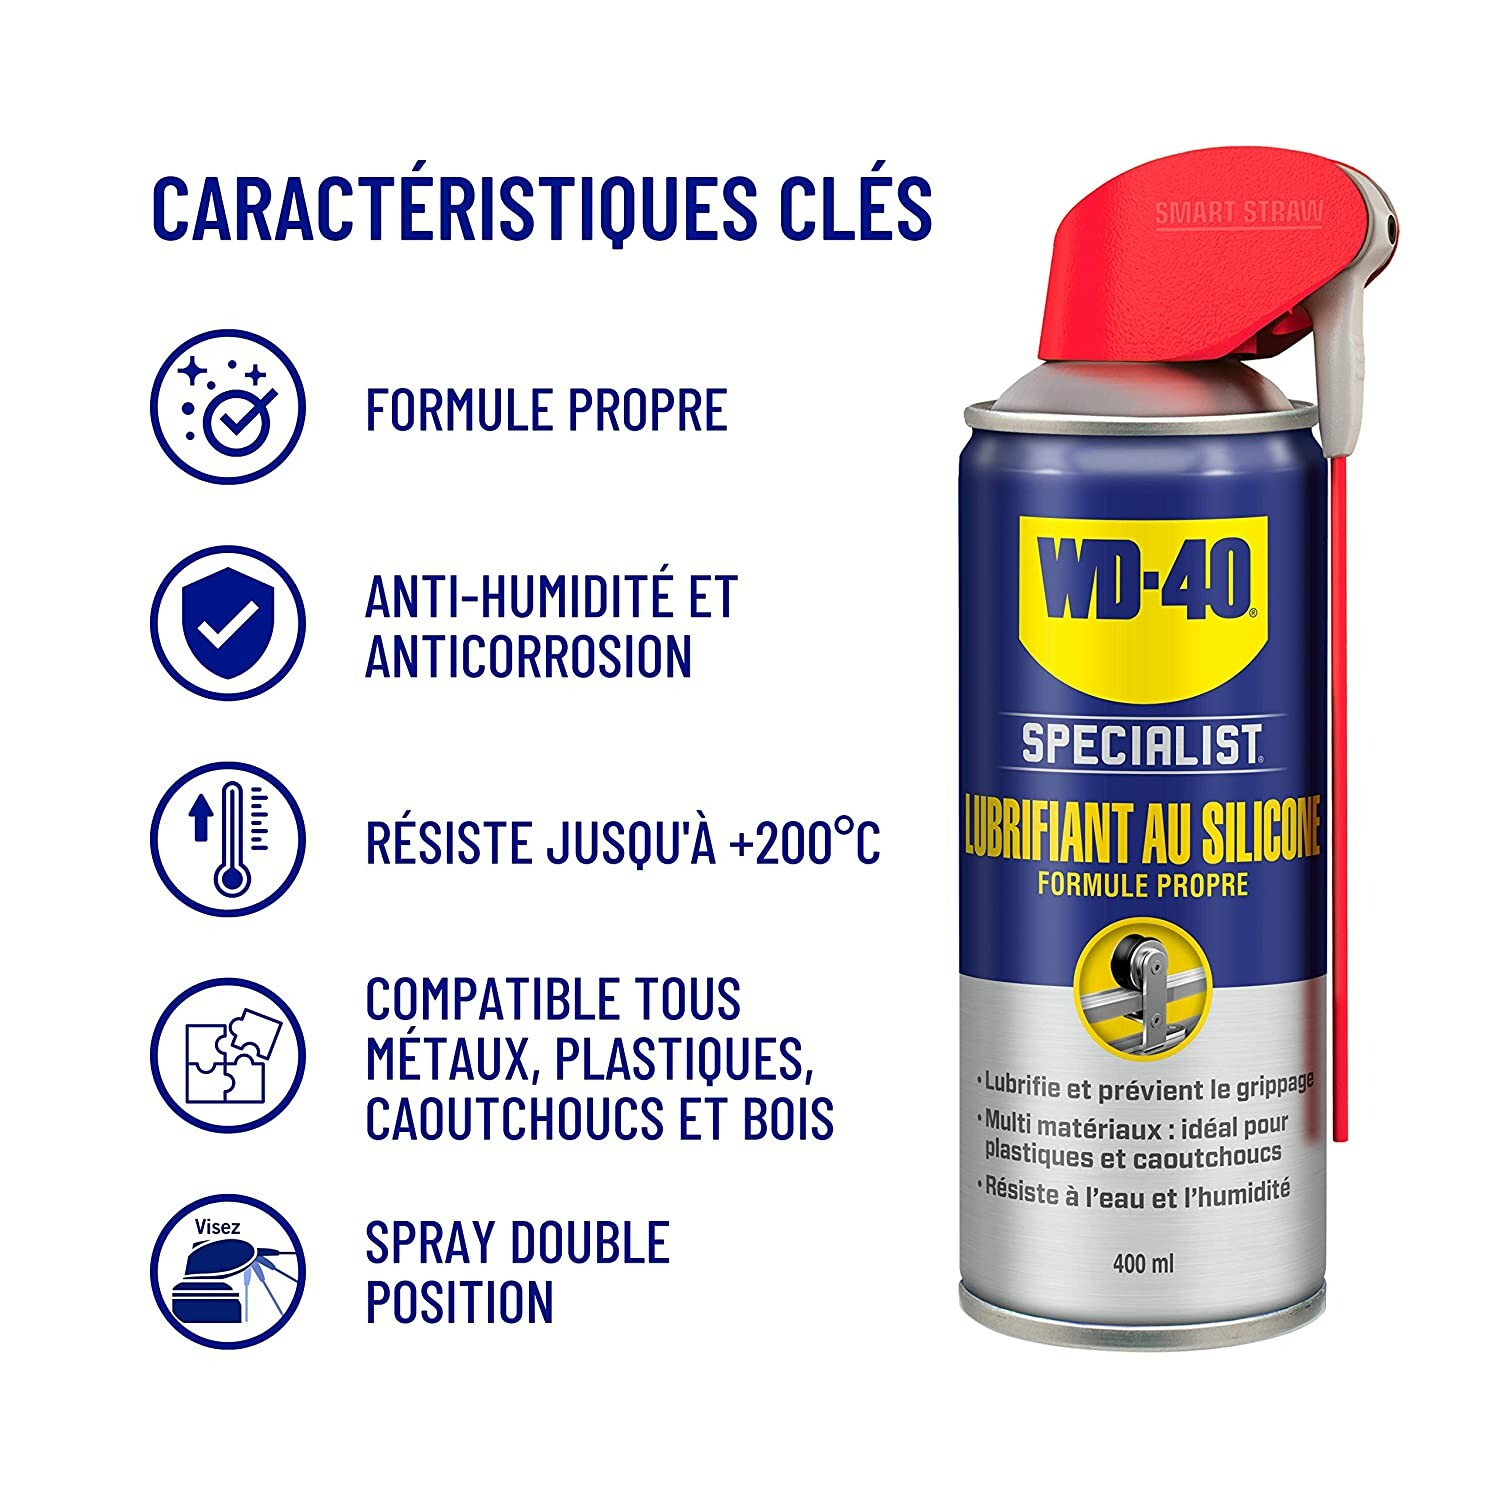 https://content.pearl.fr/media/cache/default/article_ultralarge_high_nocrop/shared/images/articles/T/TG1/lubrifiant-au-silicone-specialist-wd-40-400-ml-ref_TG1993_1.jpg